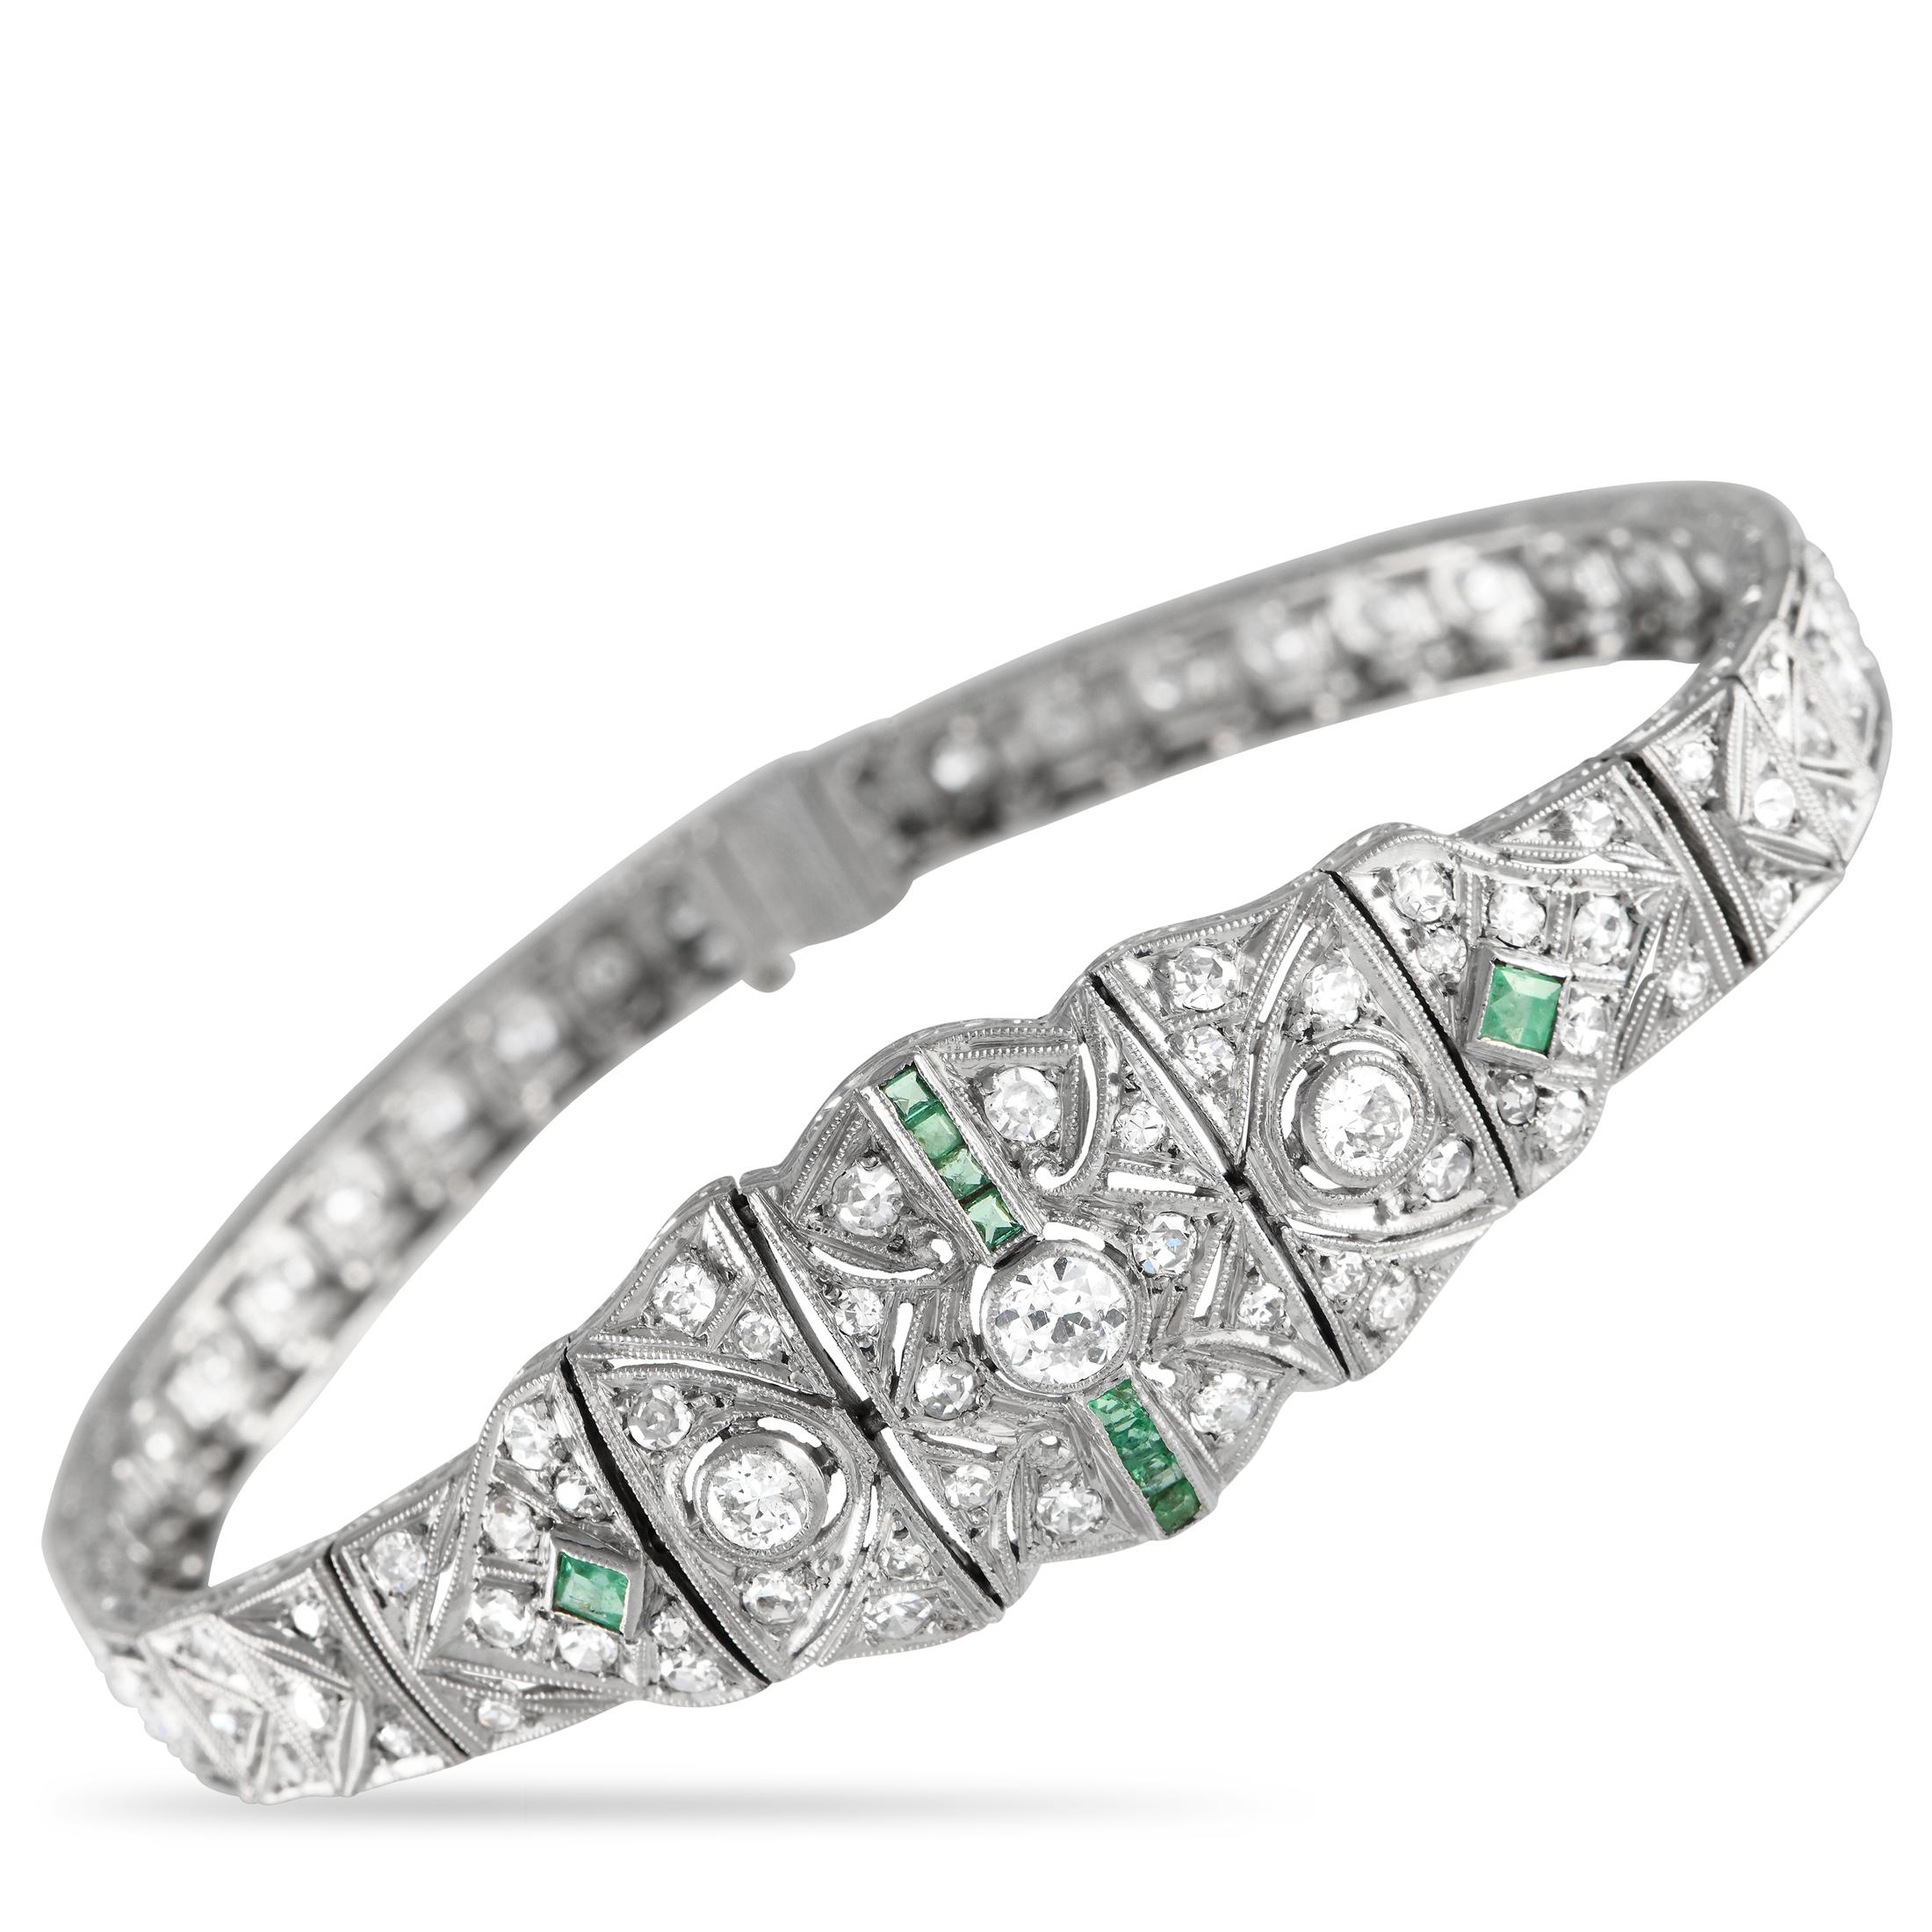 Platinum 2.50ct Diamond and Emerald Art Deco Bracelet MF10-012924 In Excellent Condition For Sale In Southampton, PA